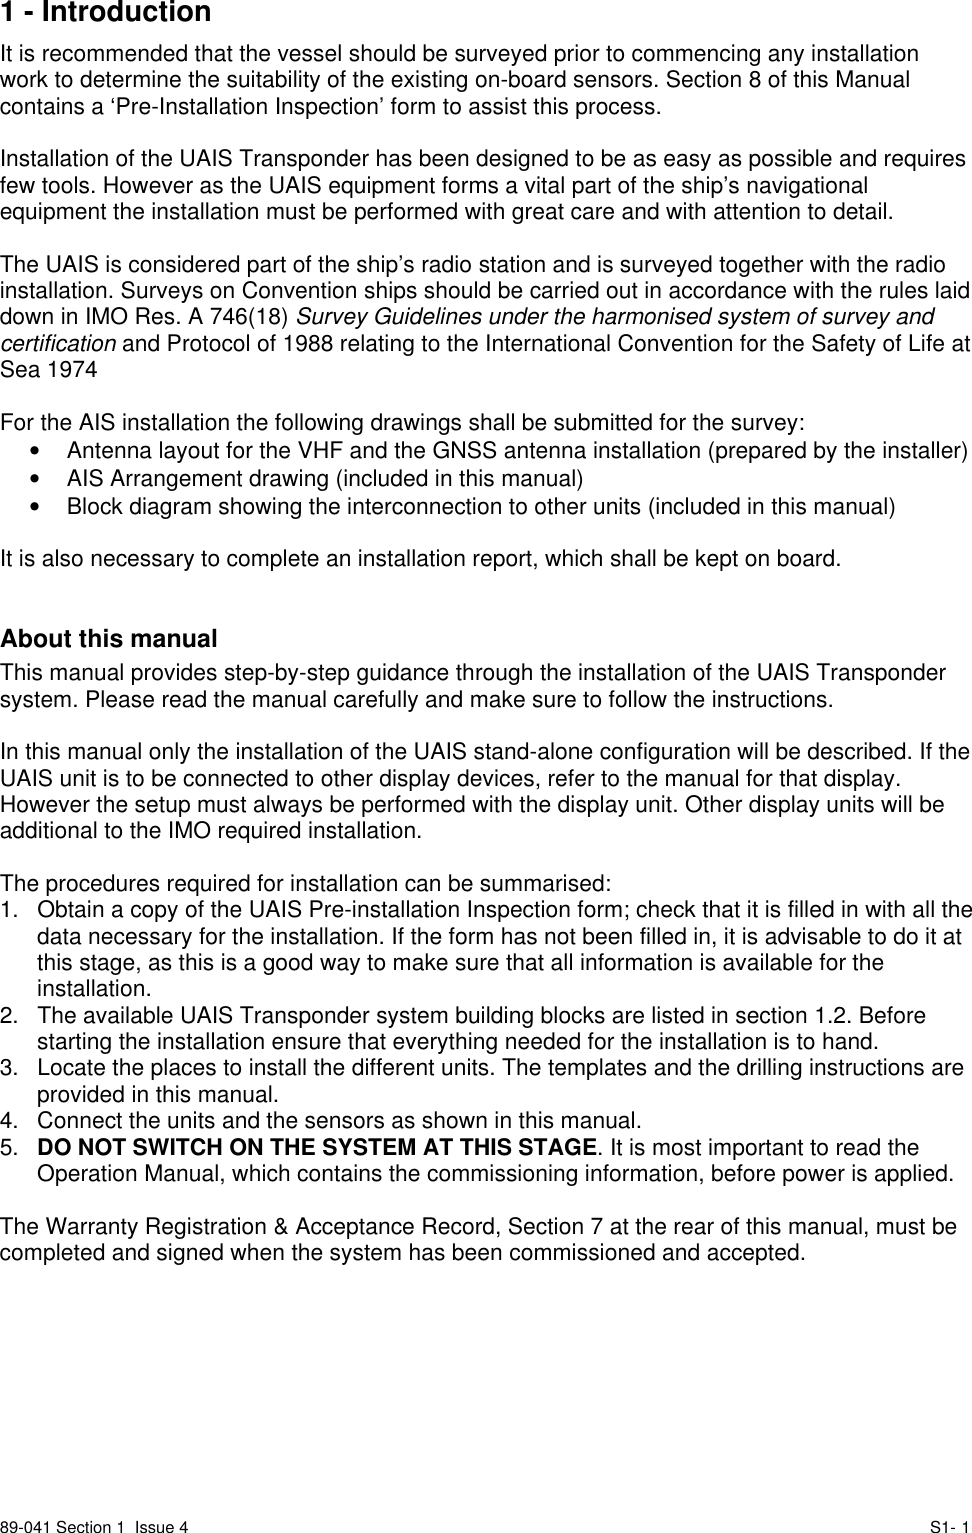 89-041 Section 1  Issue 4 S1- 11 - IntroductionIt is recommended that the vessel should be surveyed prior to commencing any installationwork to determine the suitability of the existing on-board sensors. Section 8 of this Manualcontains a ‘Pre-Installation Inspection’ form to assist this process.Installation of the UAIS Transponder has been designed to be as easy as possible and requiresfew tools. However as the UAIS equipment forms a vital part of the ship’s navigationalequipment the installation must be performed with great care and with attention to detail.The UAIS is considered part of the ship’s radio station and is surveyed together with the radioinstallation. Surveys on Convention ships should be carried out in accordance with the rules laiddown in IMO Res. A 746(18) Survey Guidelines under the harmonised system of survey andcertification and Protocol of 1988 relating to the International Convention for the Safety of Life atSea 1974For the AIS installation the following drawings shall be submitted for the survey:•  Antenna layout for the VHF and the GNSS antenna installation (prepared by the installer)•  AIS Arrangement drawing (included in this manual)•  Block diagram showing the interconnection to other units (included in this manual)It is also necessary to complete an installation report, which shall be kept on board.About this manualThis manual provides step-by-step guidance through the installation of the UAIS Transpondersystem. Please read the manual carefully and make sure to follow the instructions.In this manual only the installation of the UAIS stand-alone configuration will be described. If theUAIS unit is to be connected to other display devices, refer to the manual for that display.However the setup must always be performed with the display unit. Other display units will beadditional to the IMO required installation.The procedures required for installation can be summarised:1.  Obtain a copy of the UAIS Pre-installation Inspection form; check that it is filled in with all thedata necessary for the installation. If the form has not been filled in, it is advisable to do it atthis stage, as this is a good way to make sure that all information is available for theinstallation.2.  The available UAIS Transponder system building blocks are listed in section 1.2. Beforestarting the installation ensure that everything needed for the installation is to hand.3.  Locate the places to install the different units. The templates and the drilling instructions areprovided in this manual.4.  Connect the units and the sensors as shown in this manual.5.  DO NOT SWITCH ON THE SYSTEM AT THIS STAGE. It is most important to read theOperation Manual, which contains the commissioning information, before power is applied.The Warranty Registration &amp; Acceptance Record, Section 7 at the rear of this manual, must becompleted and signed when the system has been commissioned and accepted.